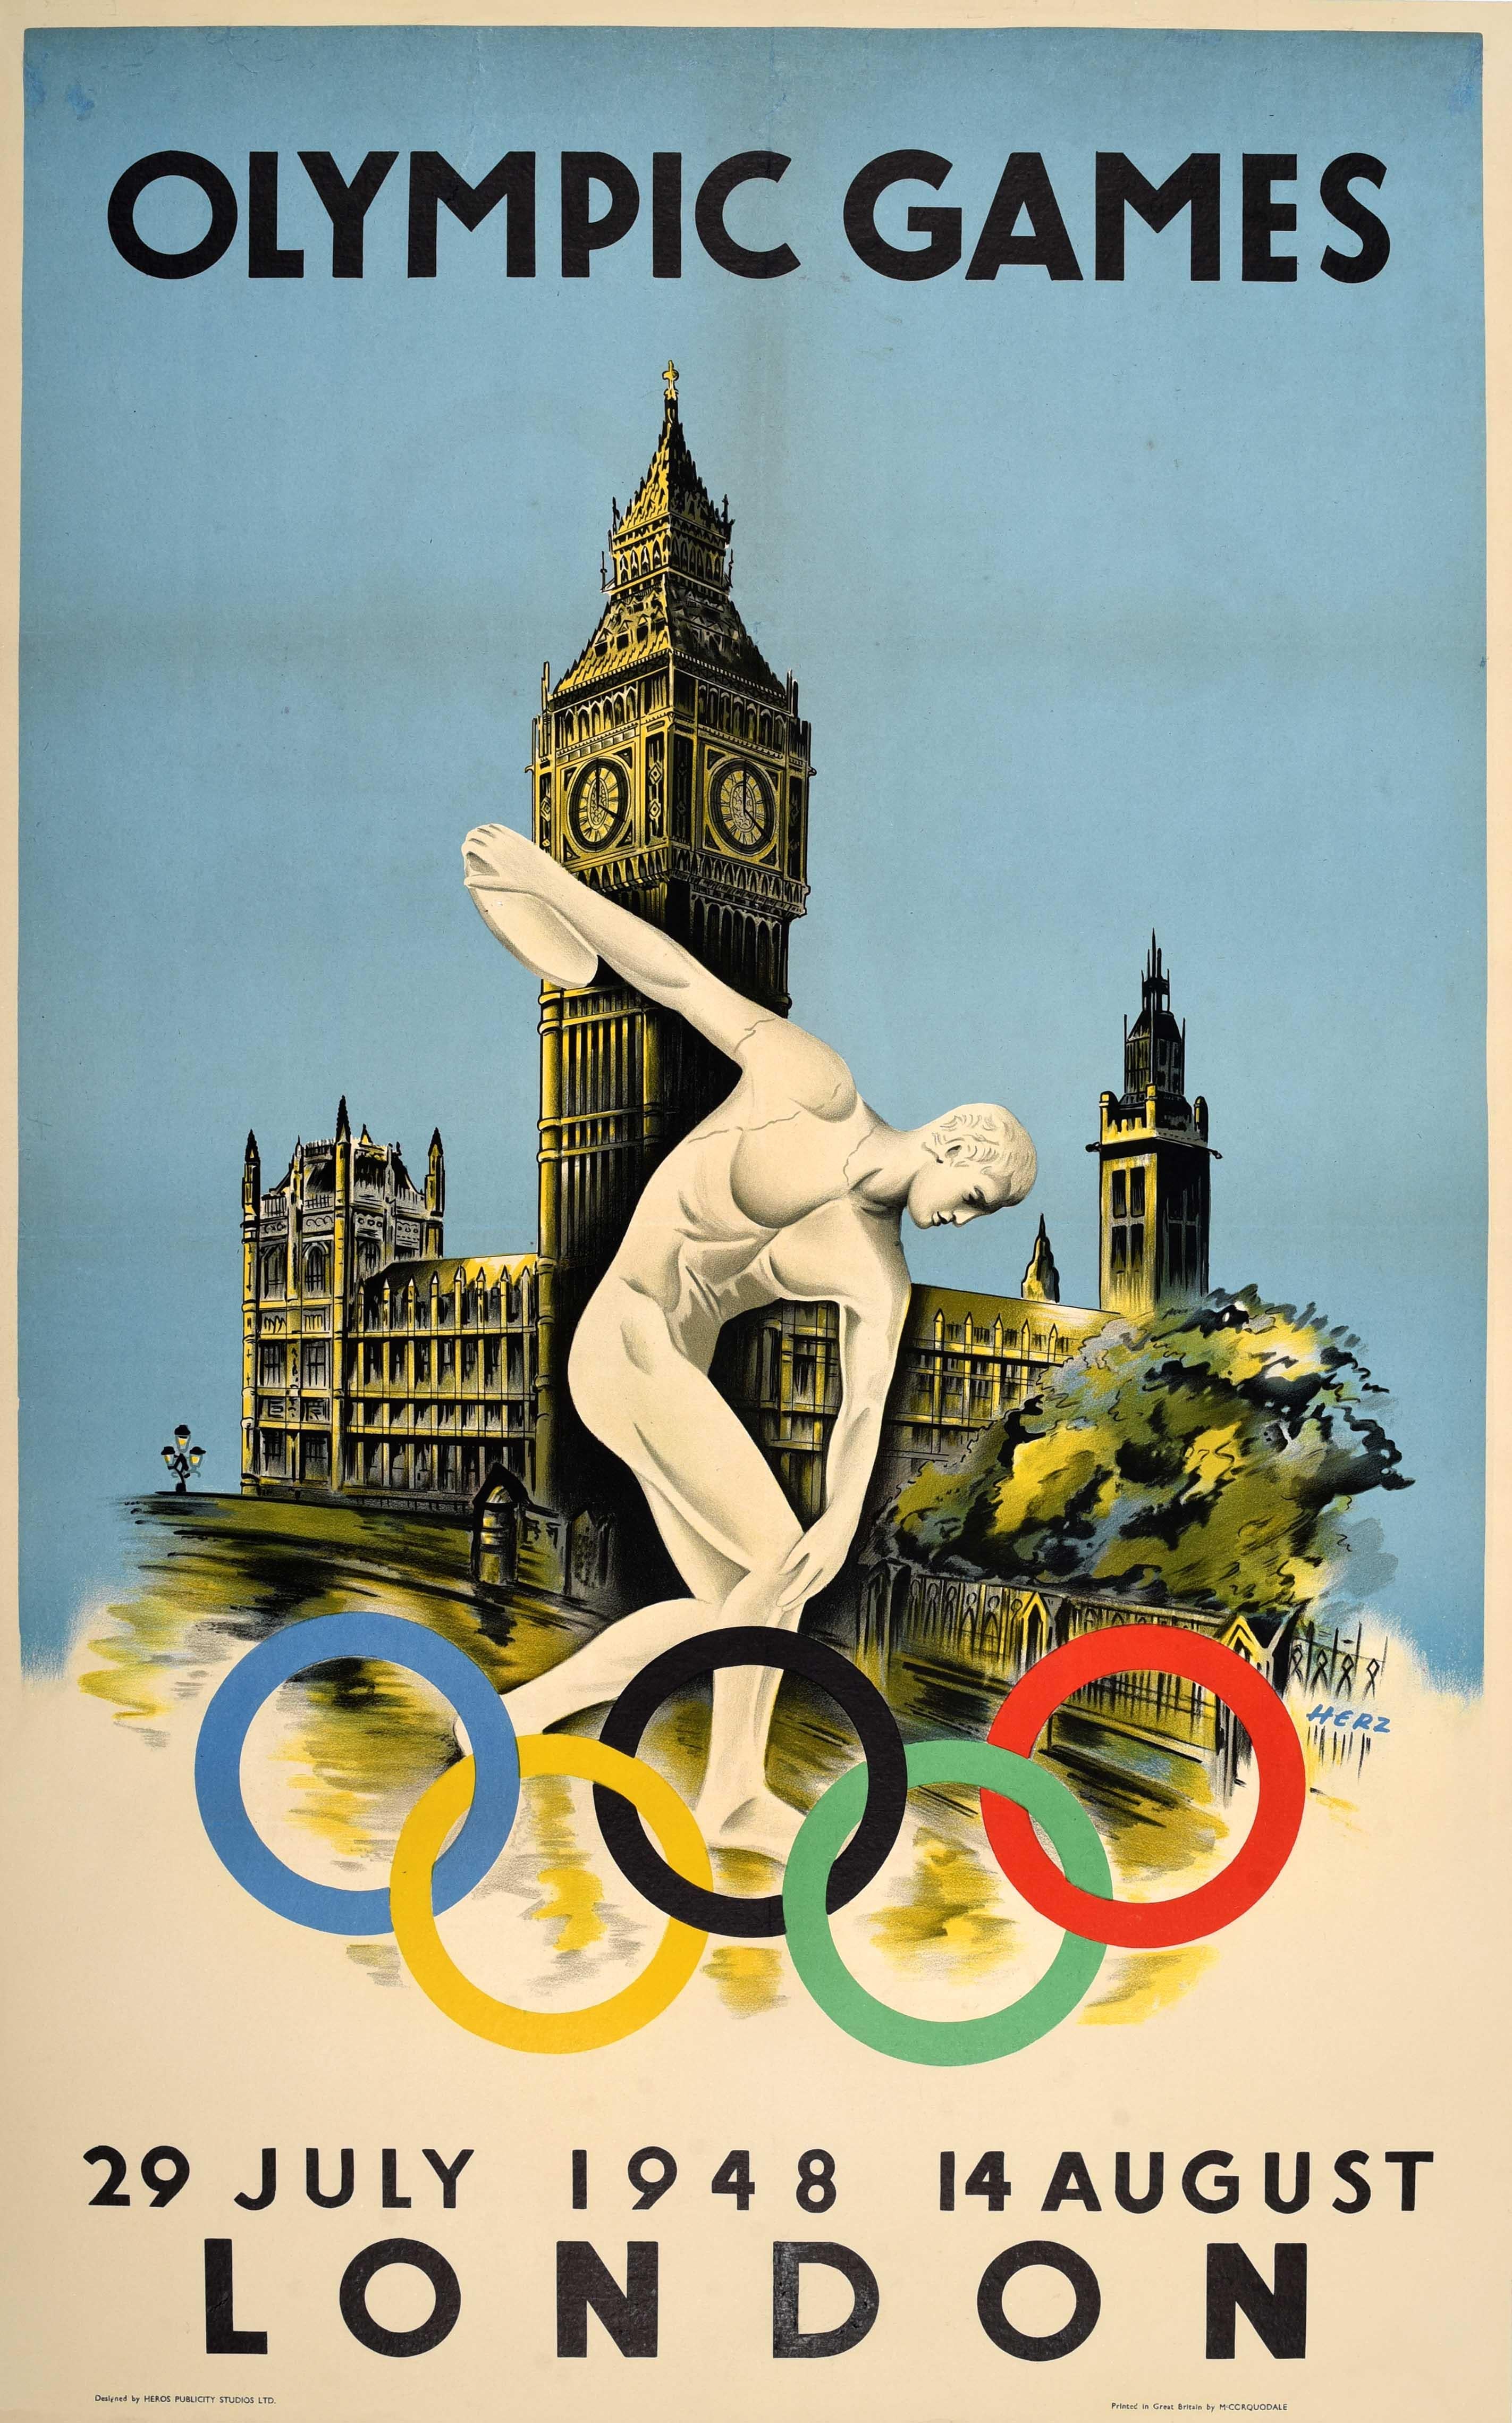 Original vintage poster for the 1948 London Olympic Games held from 29 July to 14 August, the first Games held after World War Two. Iconic design by Walter Herz (b 1909) featuring the Ancient Greek statue of Discobolus of Myron, the discus thrower,